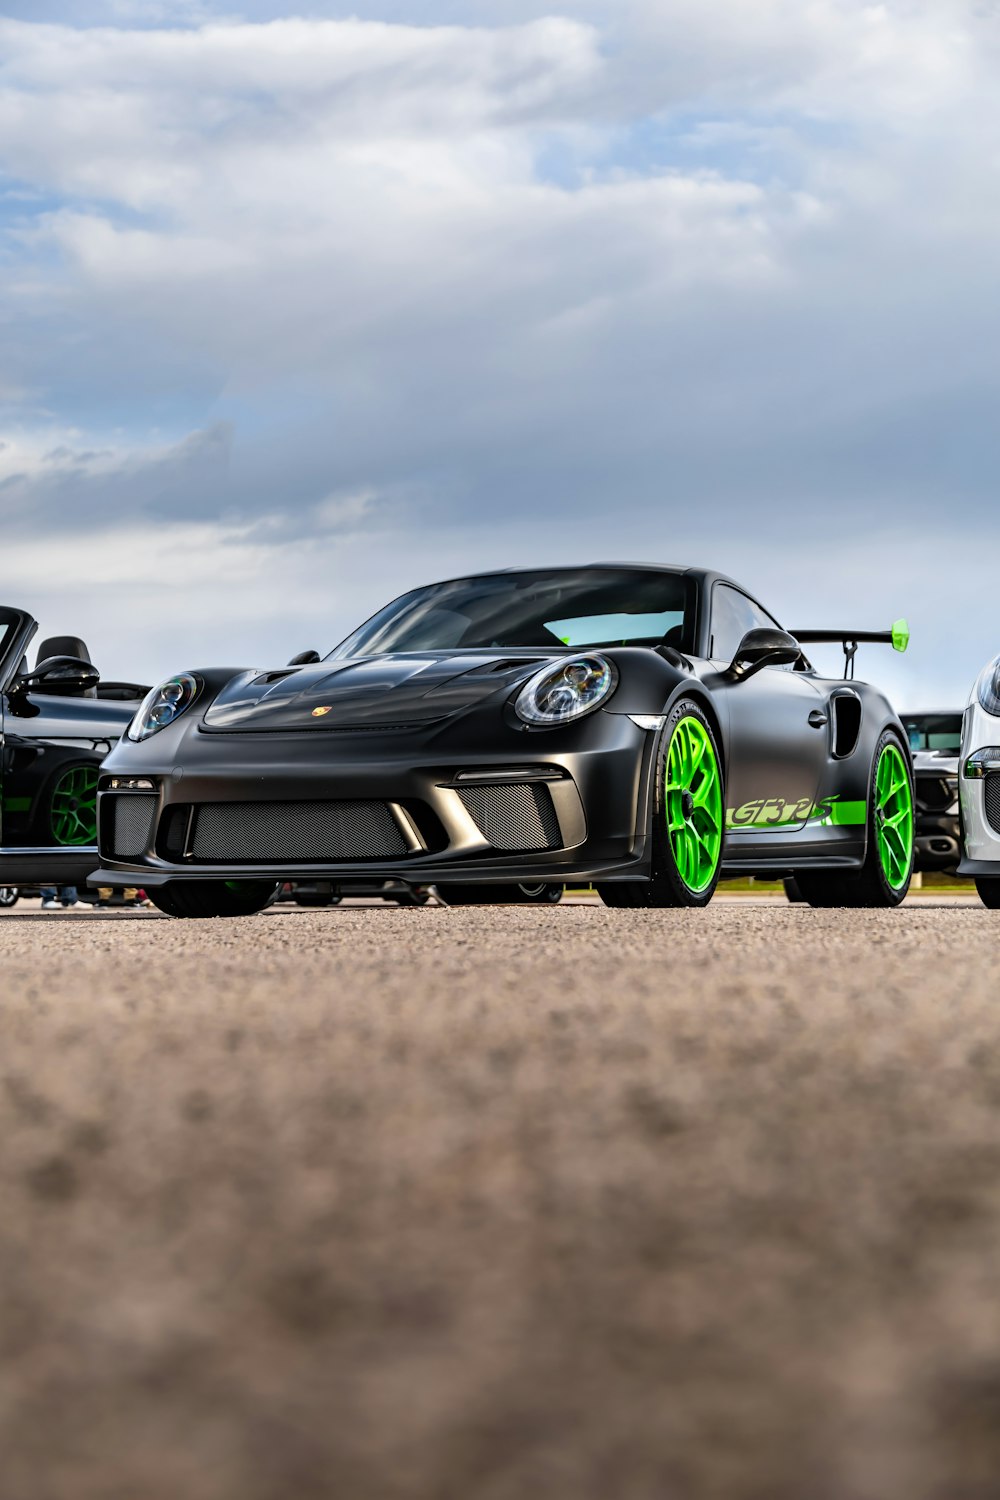 black and green porsche 911 on brown dirt road under gray clouds